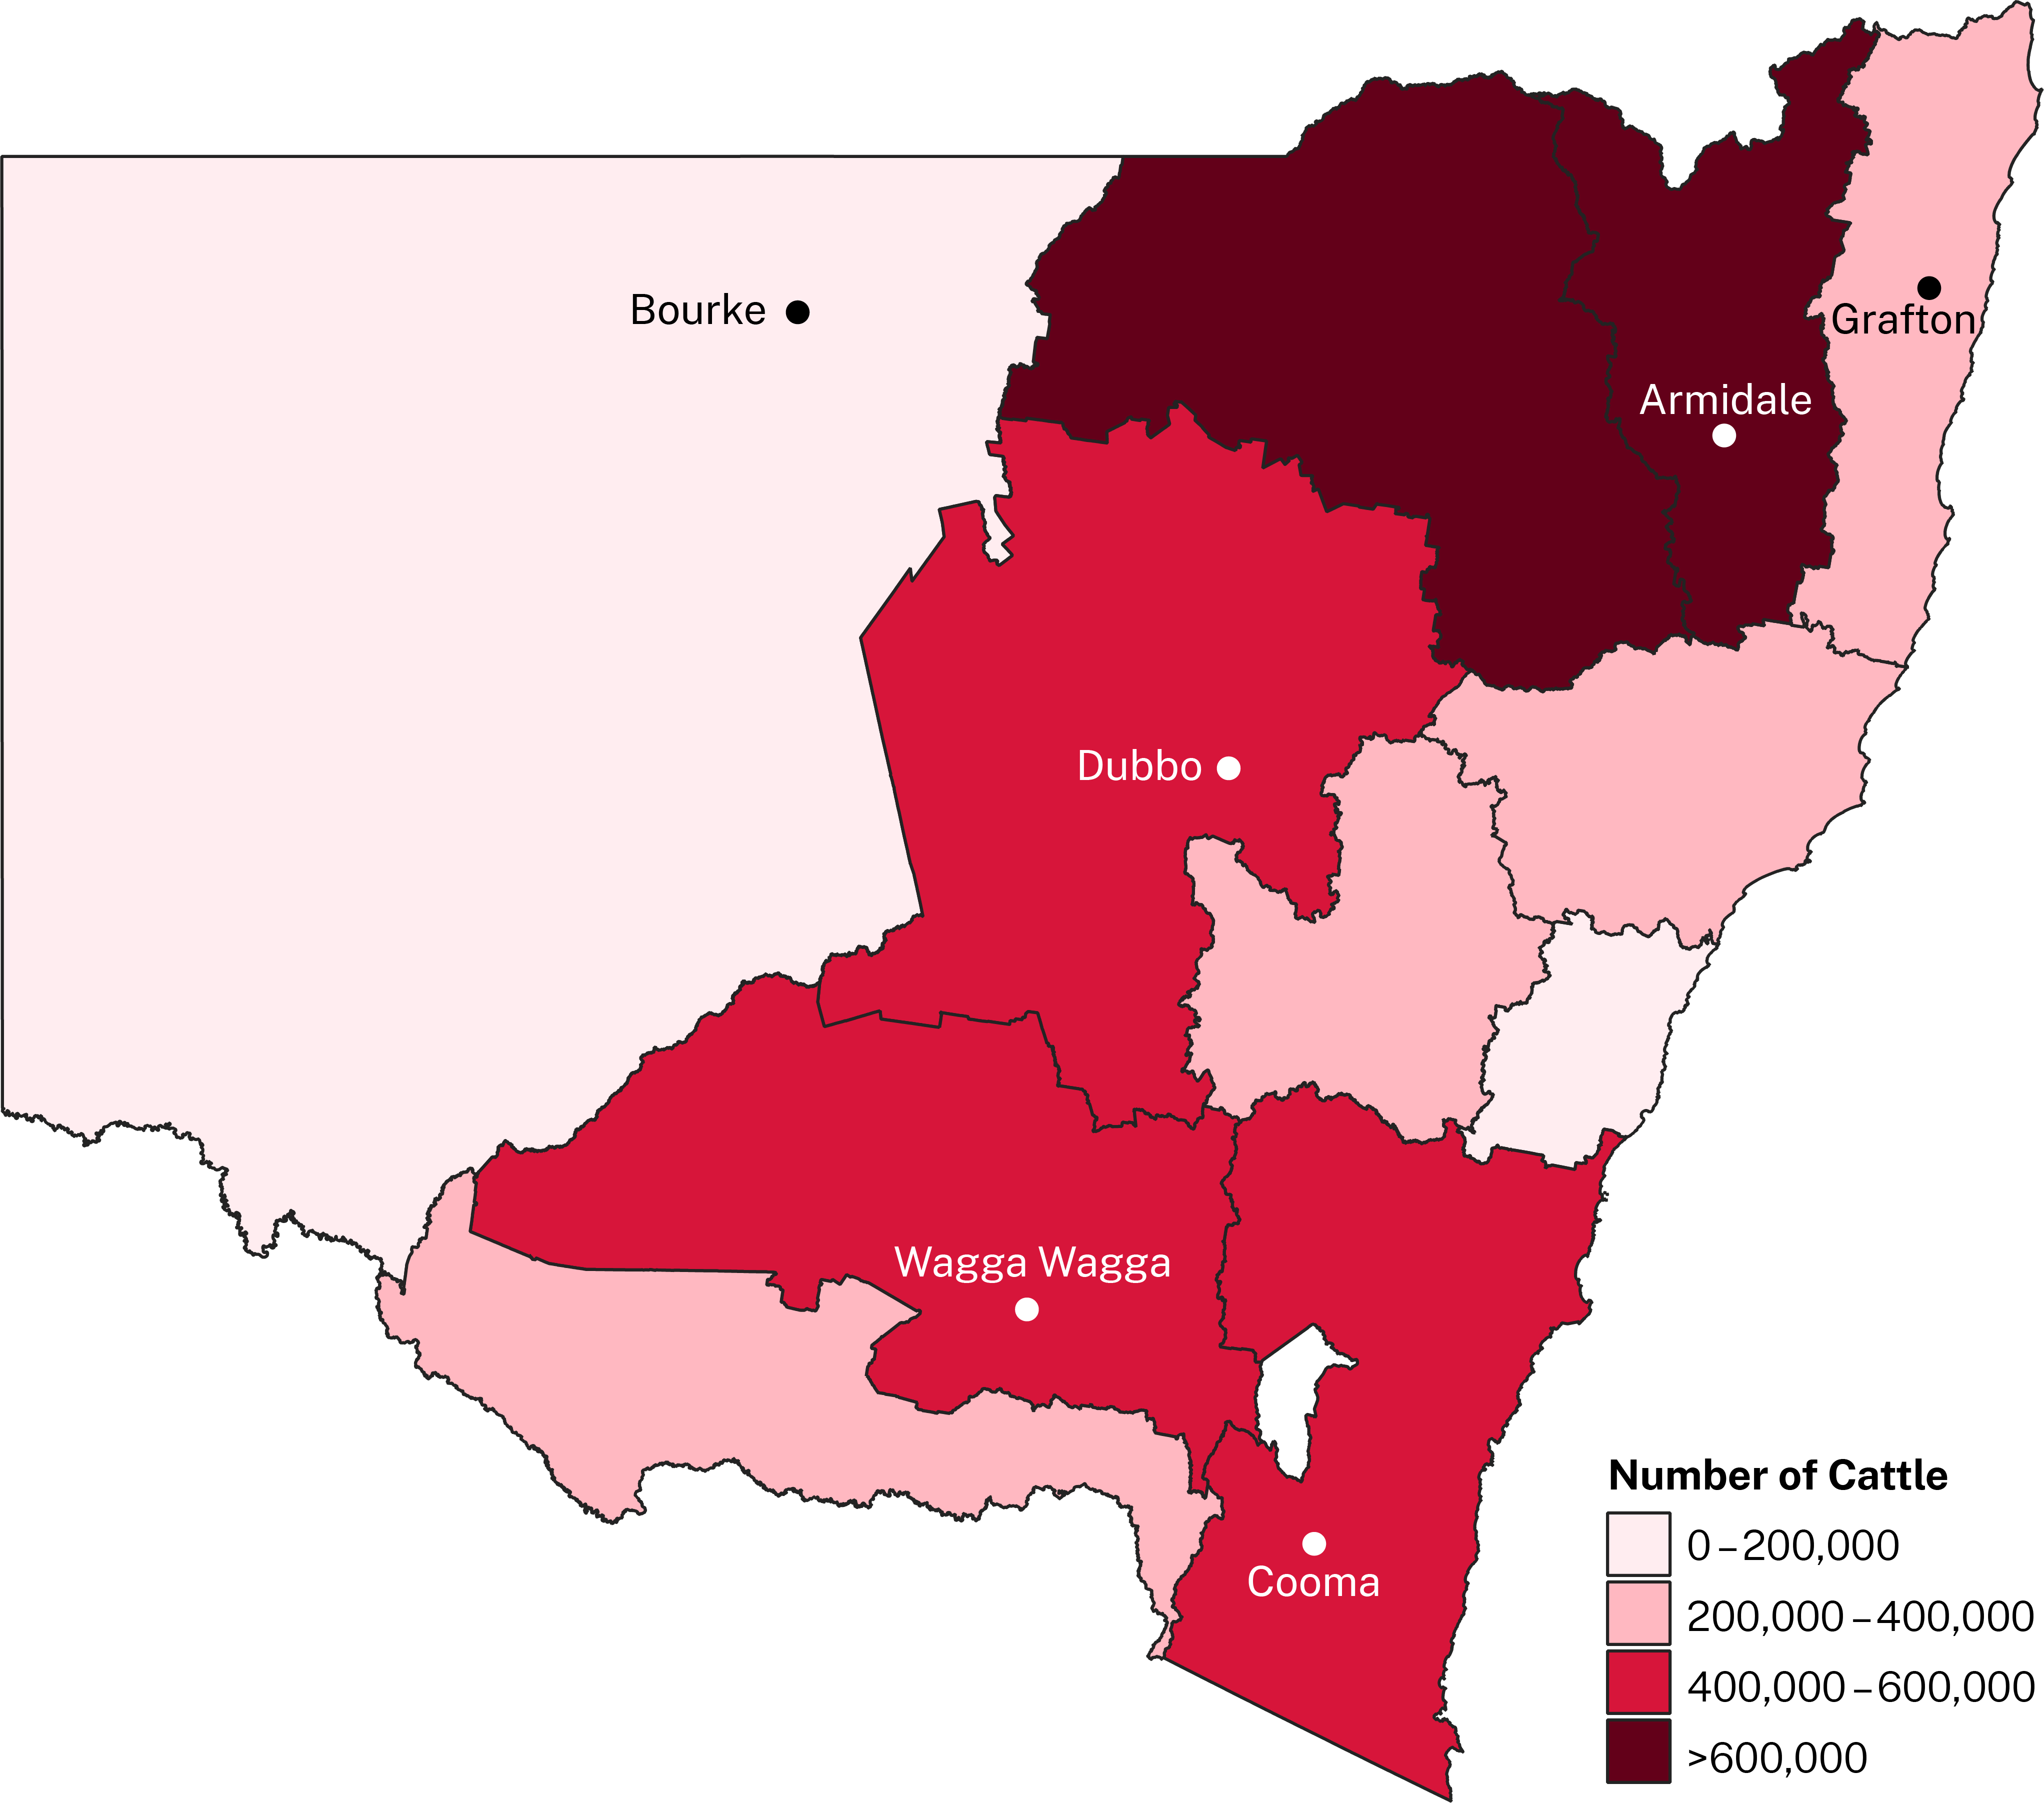 Cattle production is widespread in NSW.